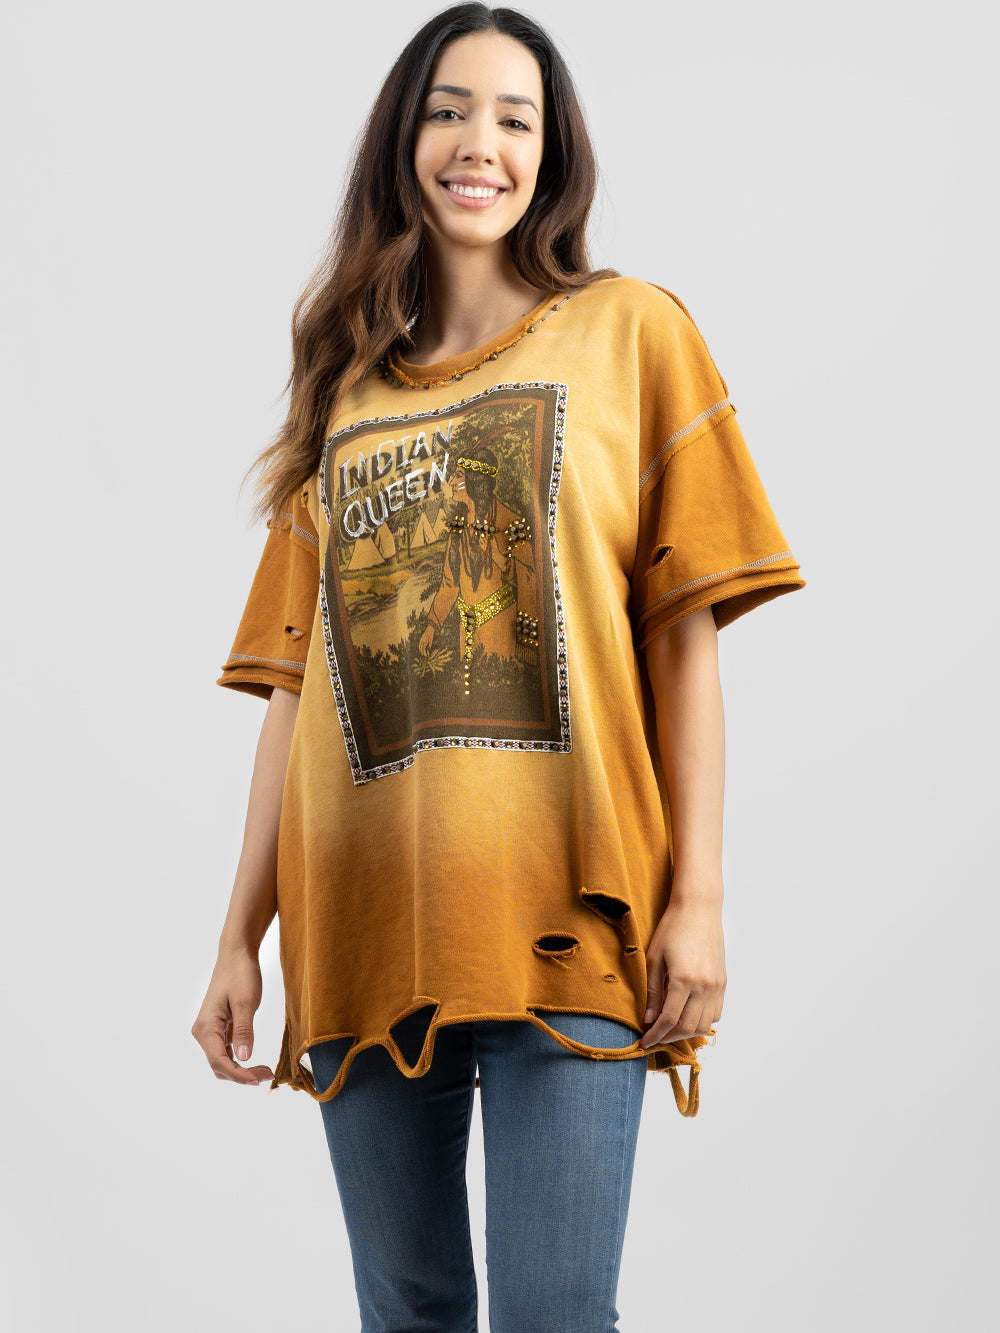 Women's Mineral Wash Abrasion "INDIAN QUEEN" Graphic Short Sleeve Shirt - Cowgirl Wear